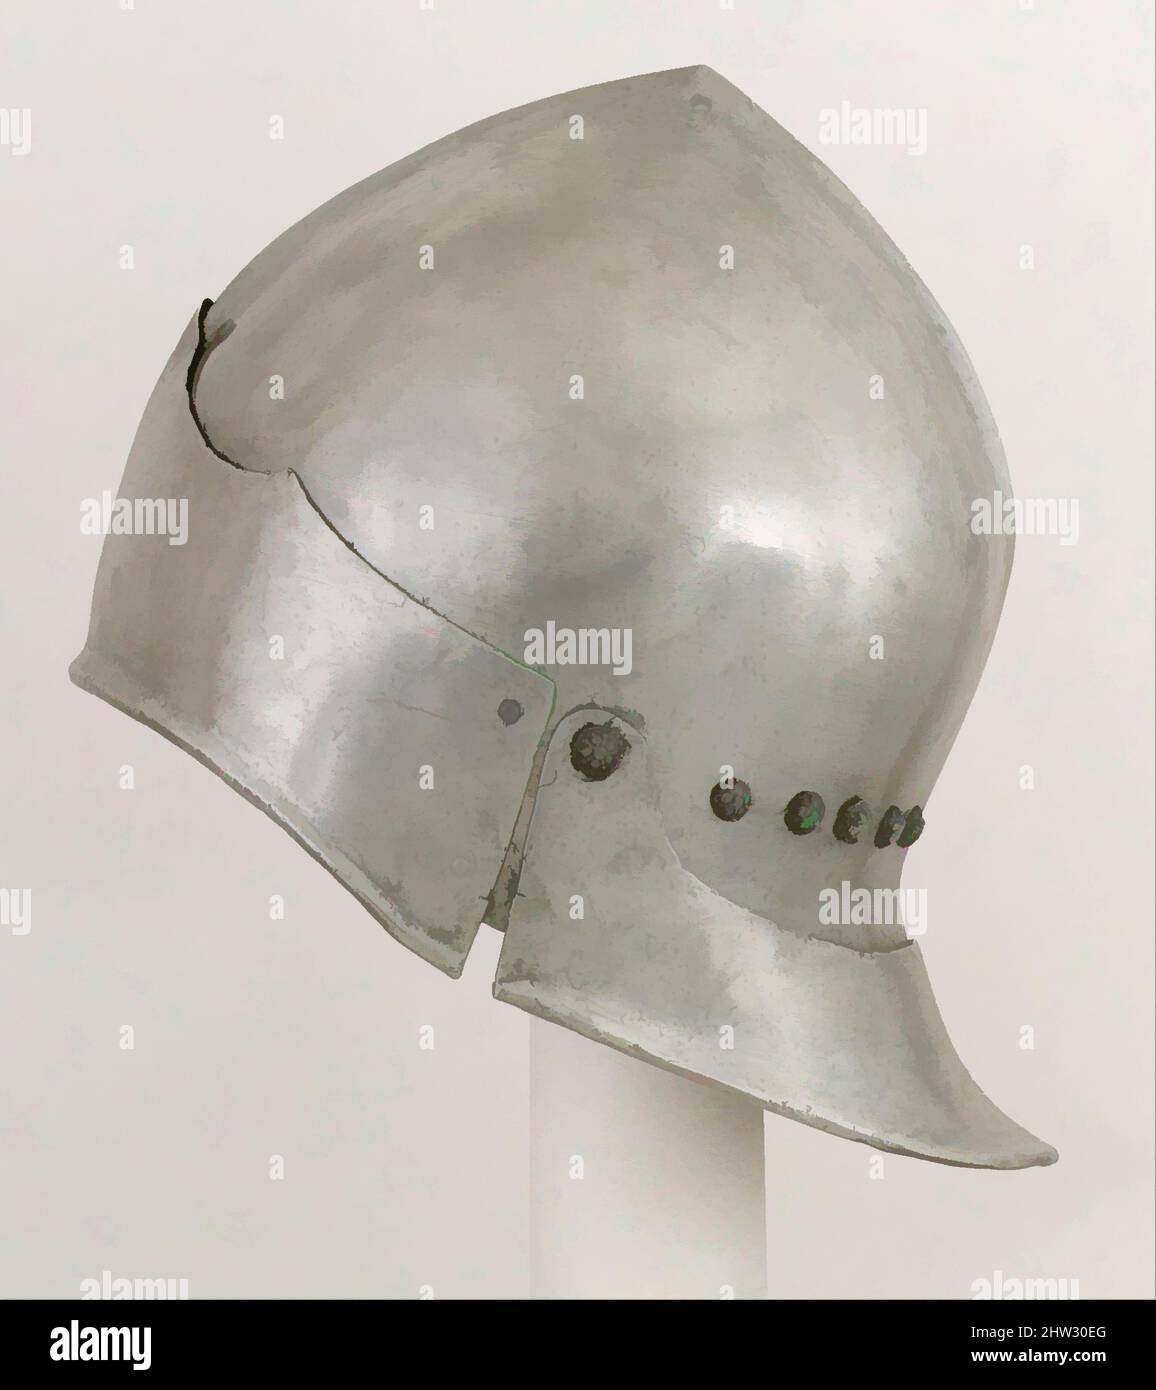 Art inspired by Sallet in the Franco-Burgundian Style, late 15th century, said to have been found in Givet, Champagne-Ardenne, possibly Italian, Steel, H. 9 in. (22.9 cm); W. 8 in. (20.3 cm); D. 12 1/4 in. (31.1 cm); Wt. 3 lb. 13 oz. (1737 g), Helmets, Classic works modernized by Artotop with a splash of modernity. Shapes, color and value, eye-catching visual impact on art. Emotions through freedom of artworks in a contemporary way. A timeless message pursuing a wildly creative new direction. Artists turning to the digital medium and creating the Artotop NFT Stock Photo